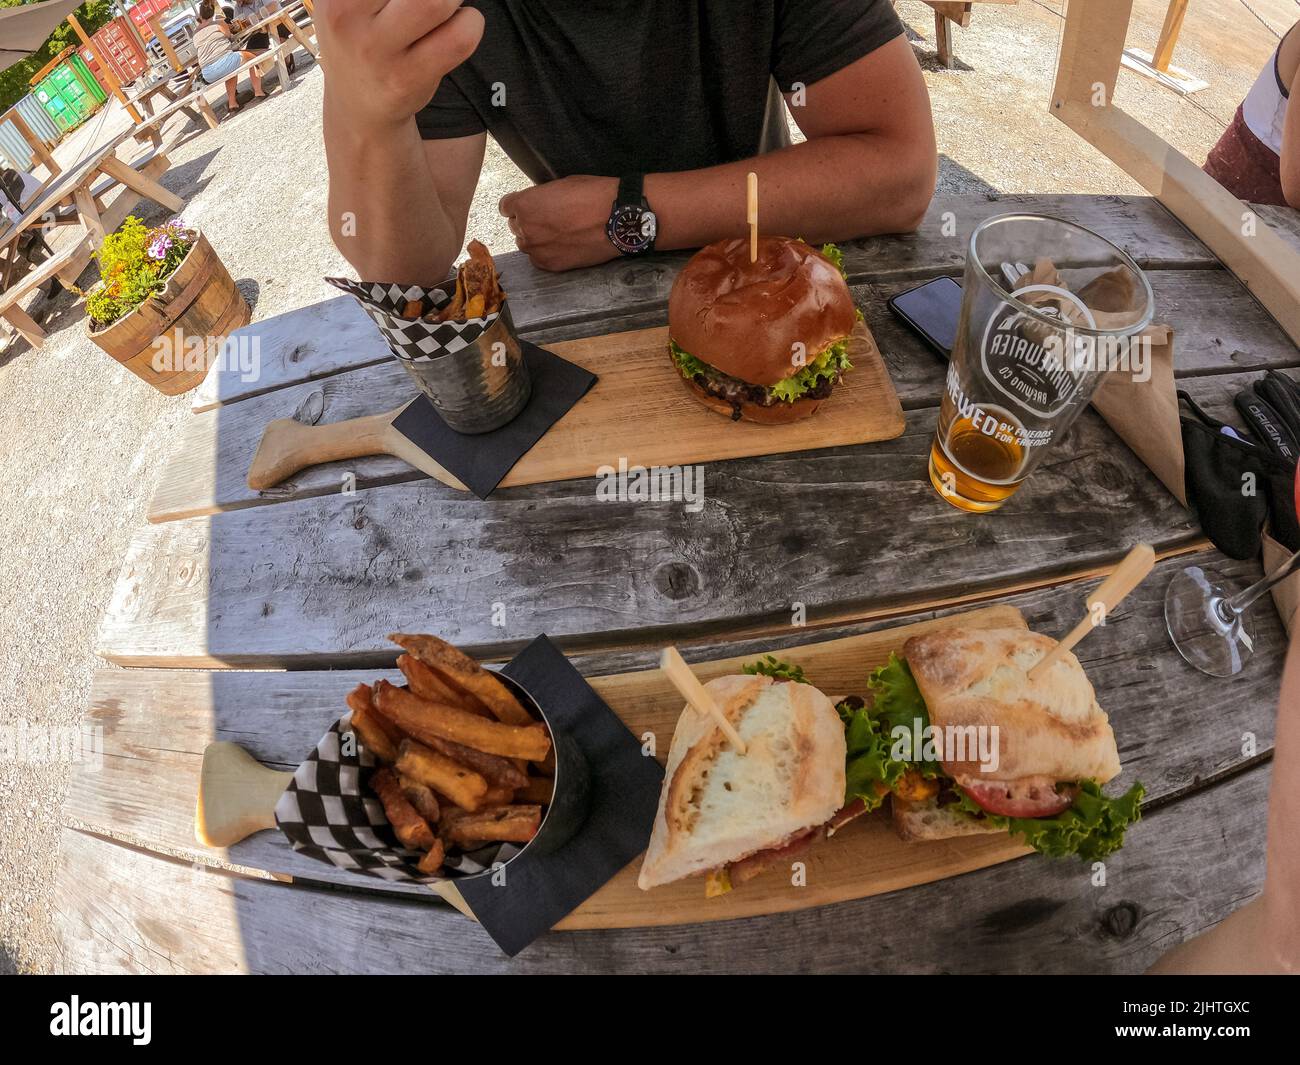 Point of view of young friends eating burgers, sandwiches at restaurant patio after work - Friendship concept with happy people enjoying time together Stock Photo